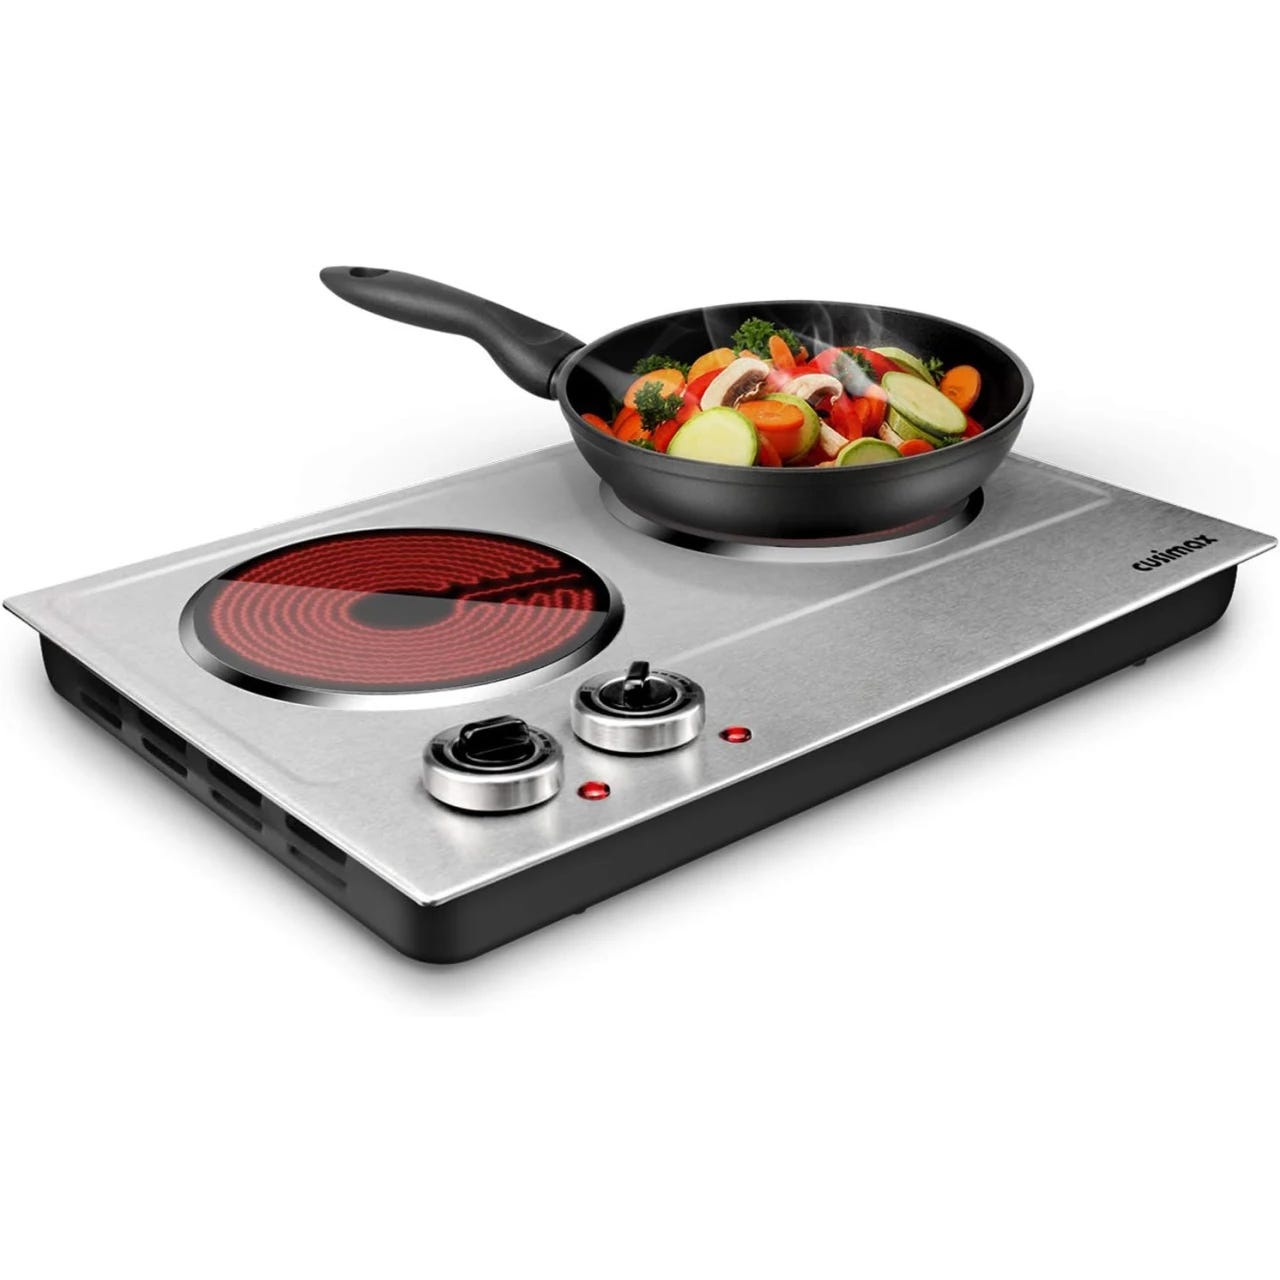 Cast Iron Burners vs Stainless Steel (Update) - Our Recipes for